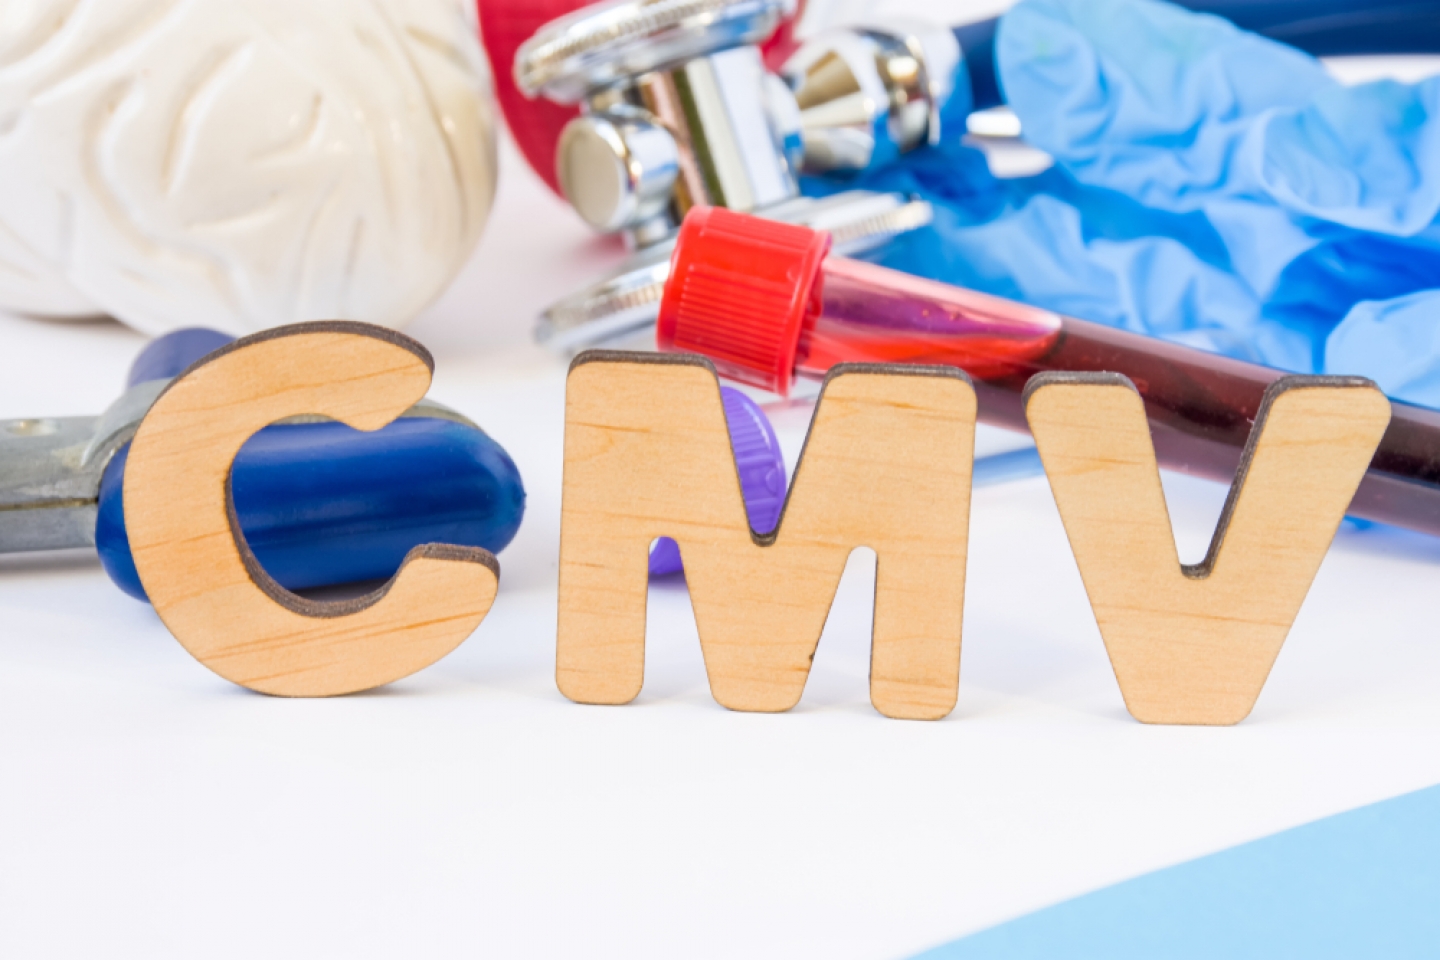 CMV abbreviation or acronym in foreground, in laboratory, scientific or medical practice 